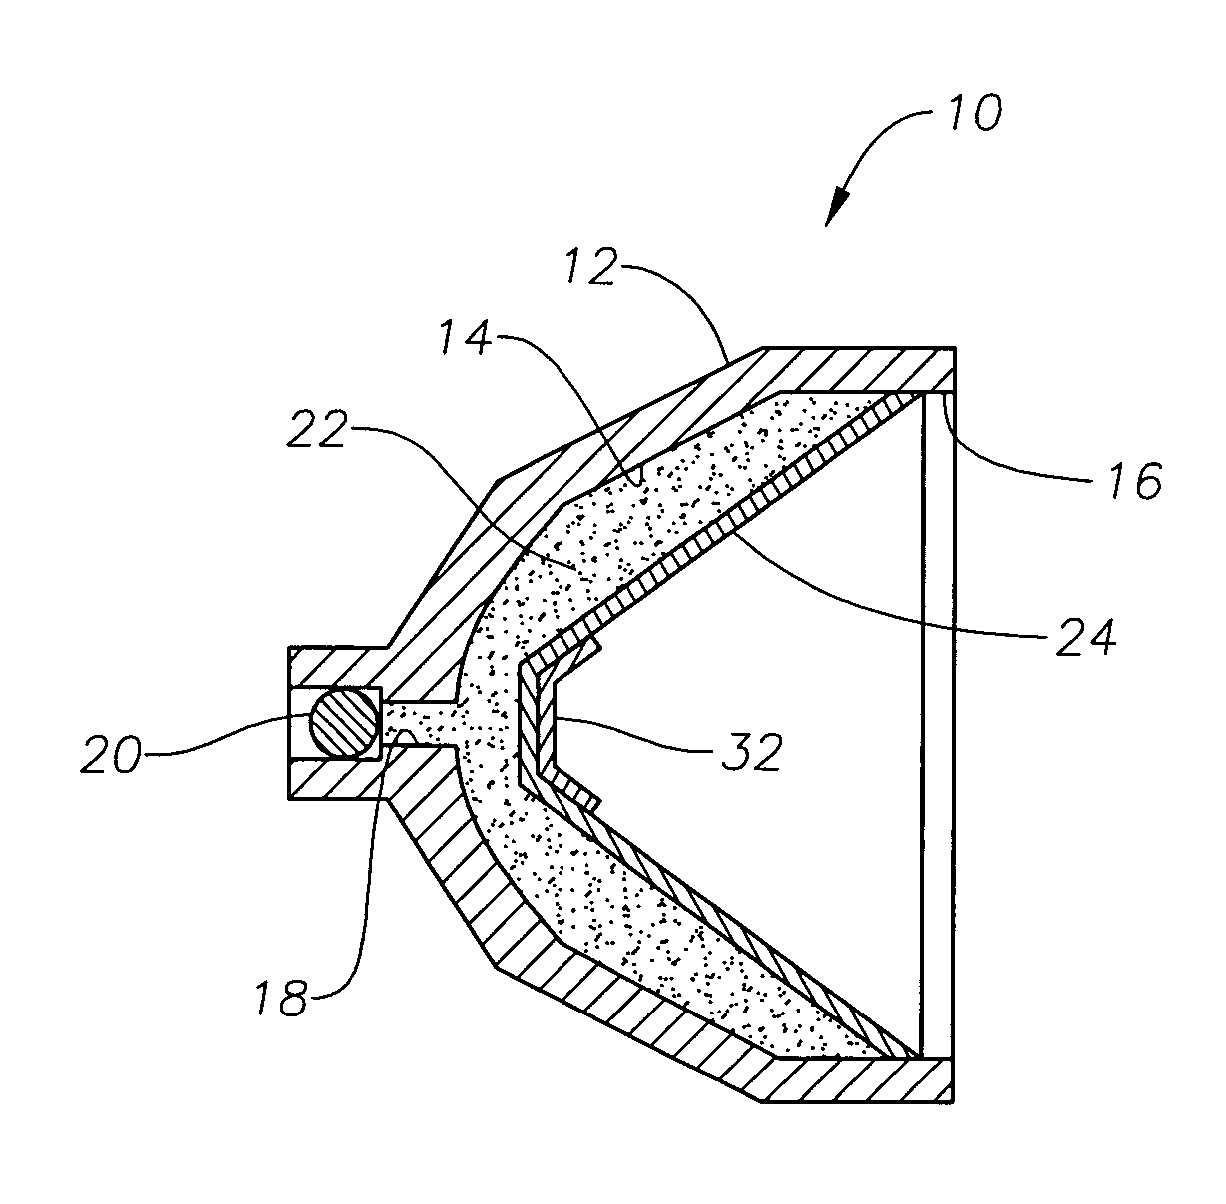 Apparatus and method for penetrating oilbearing sandy formations, reducing skin damage and reducing hydrocarbon viscosity